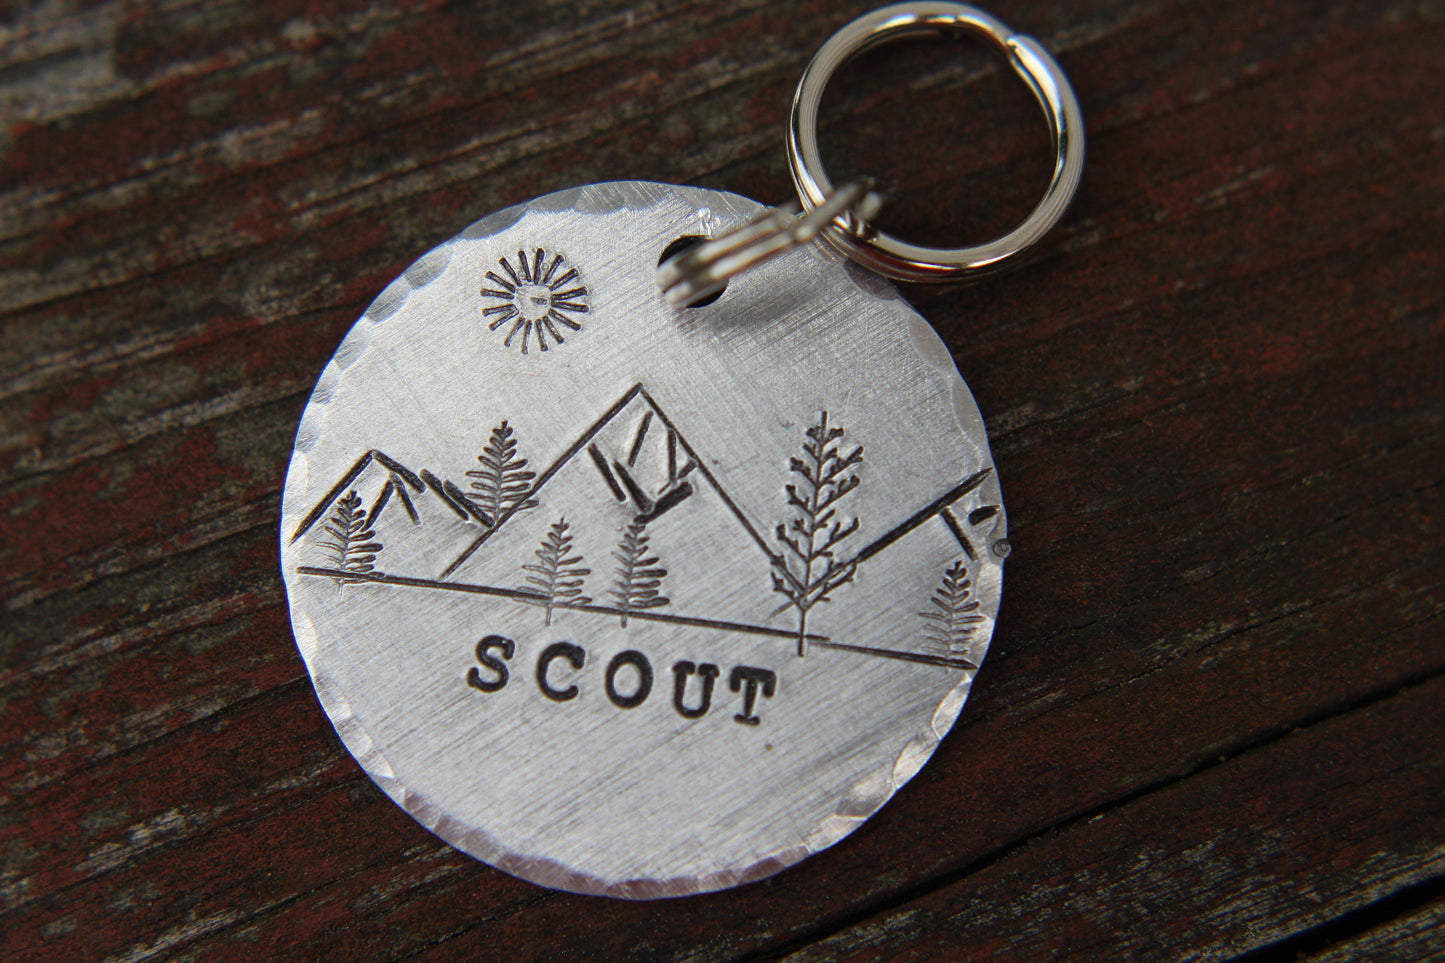 Pet ID with Mountains, Wilderness Tag, Dog ID Tag, Dog Tag with Trees, Hand stamped ID, Custom Dog Tag, Tag for Dog